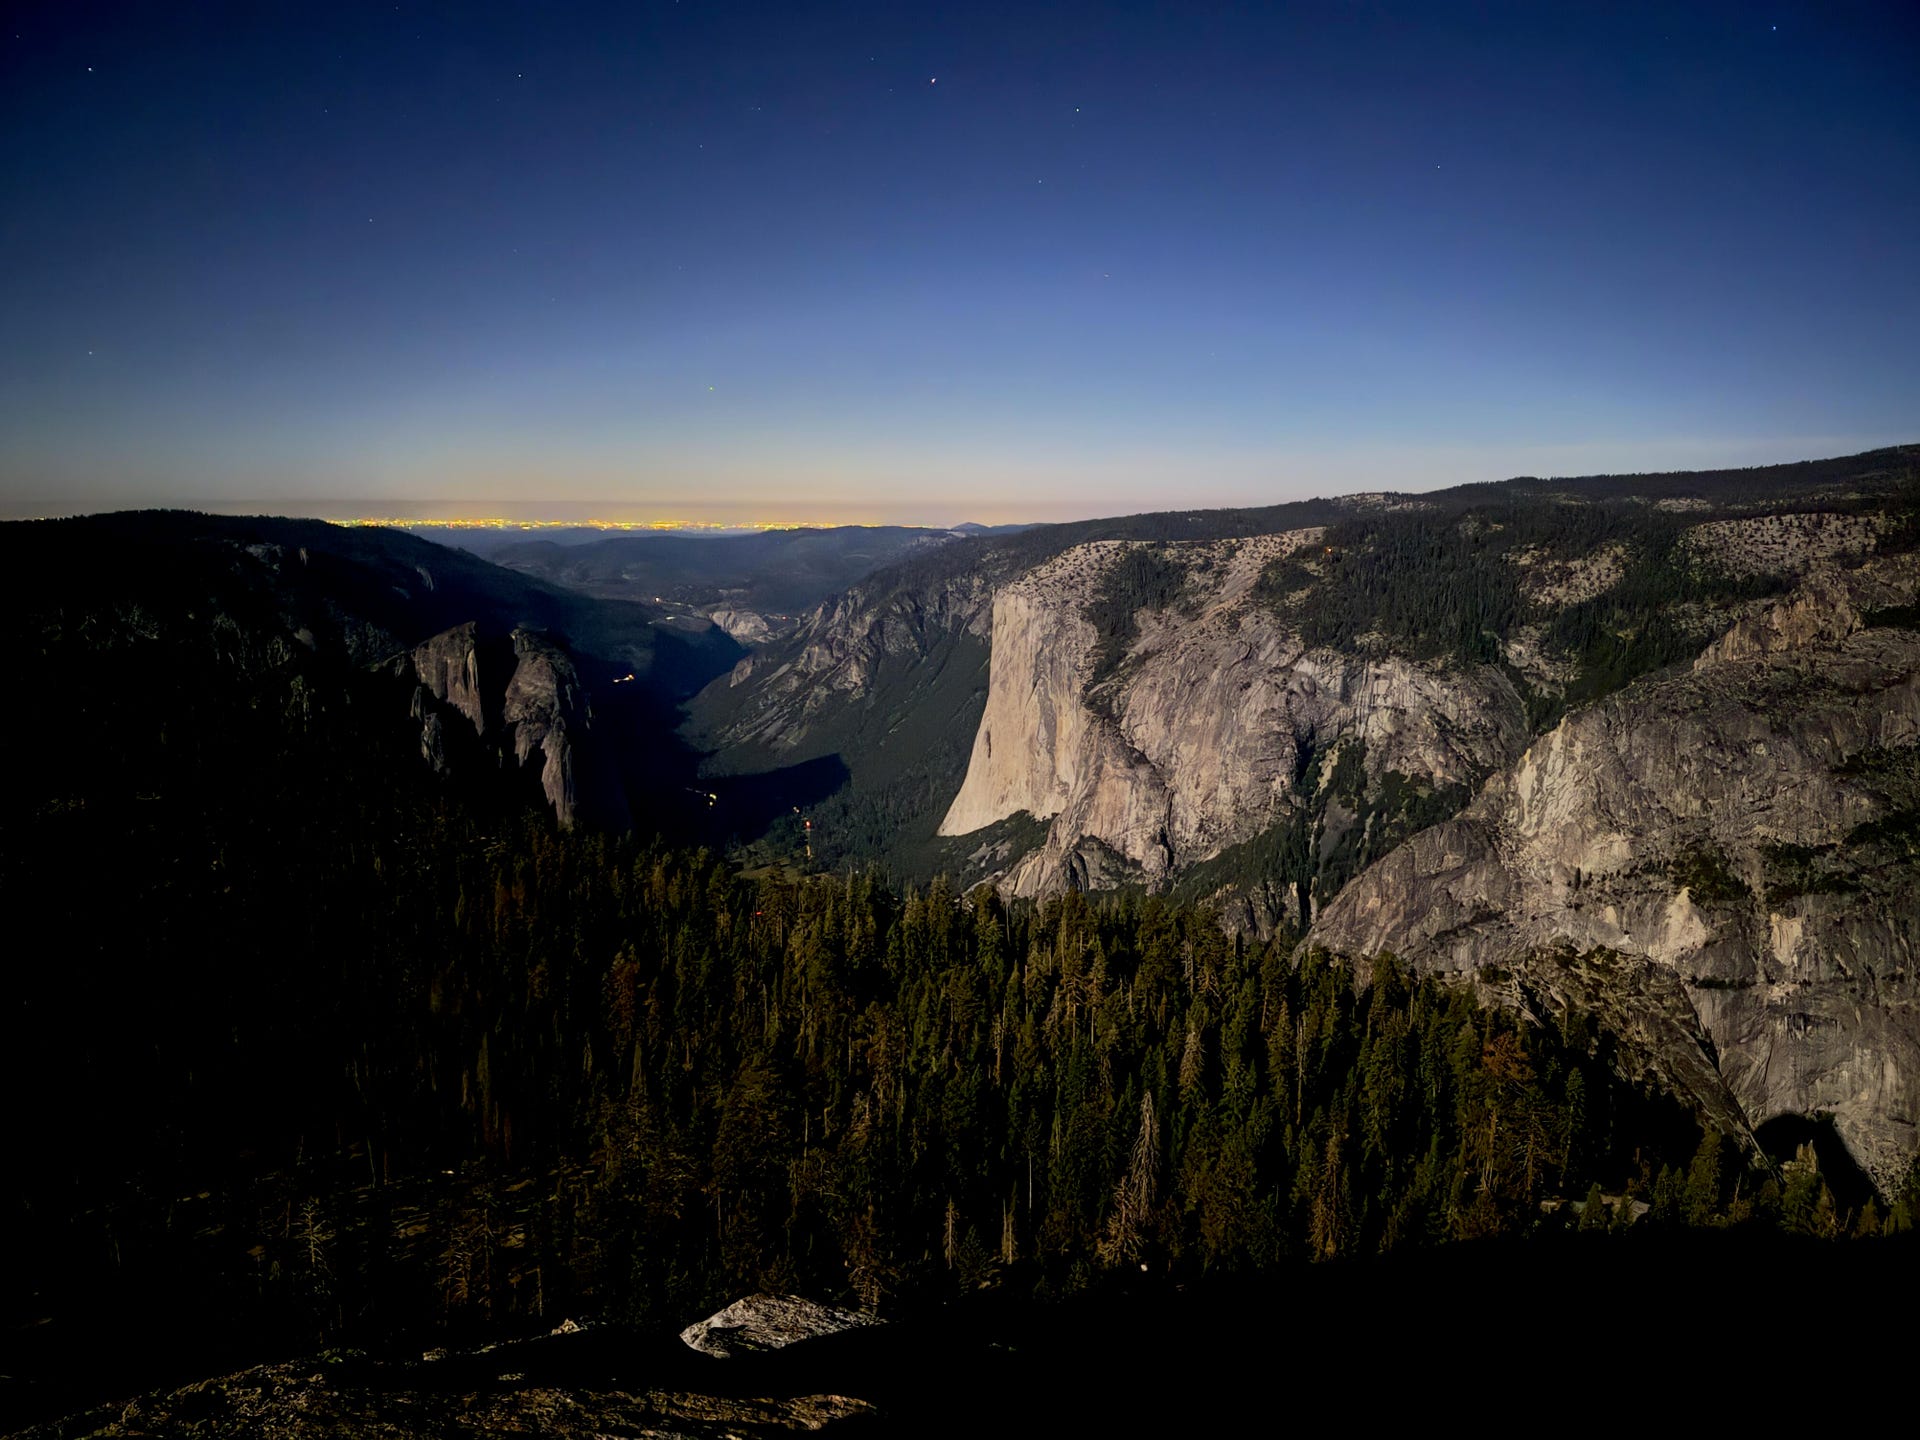 Looking down into the Yosemite Valley from the top of Sentinel Dome at night.